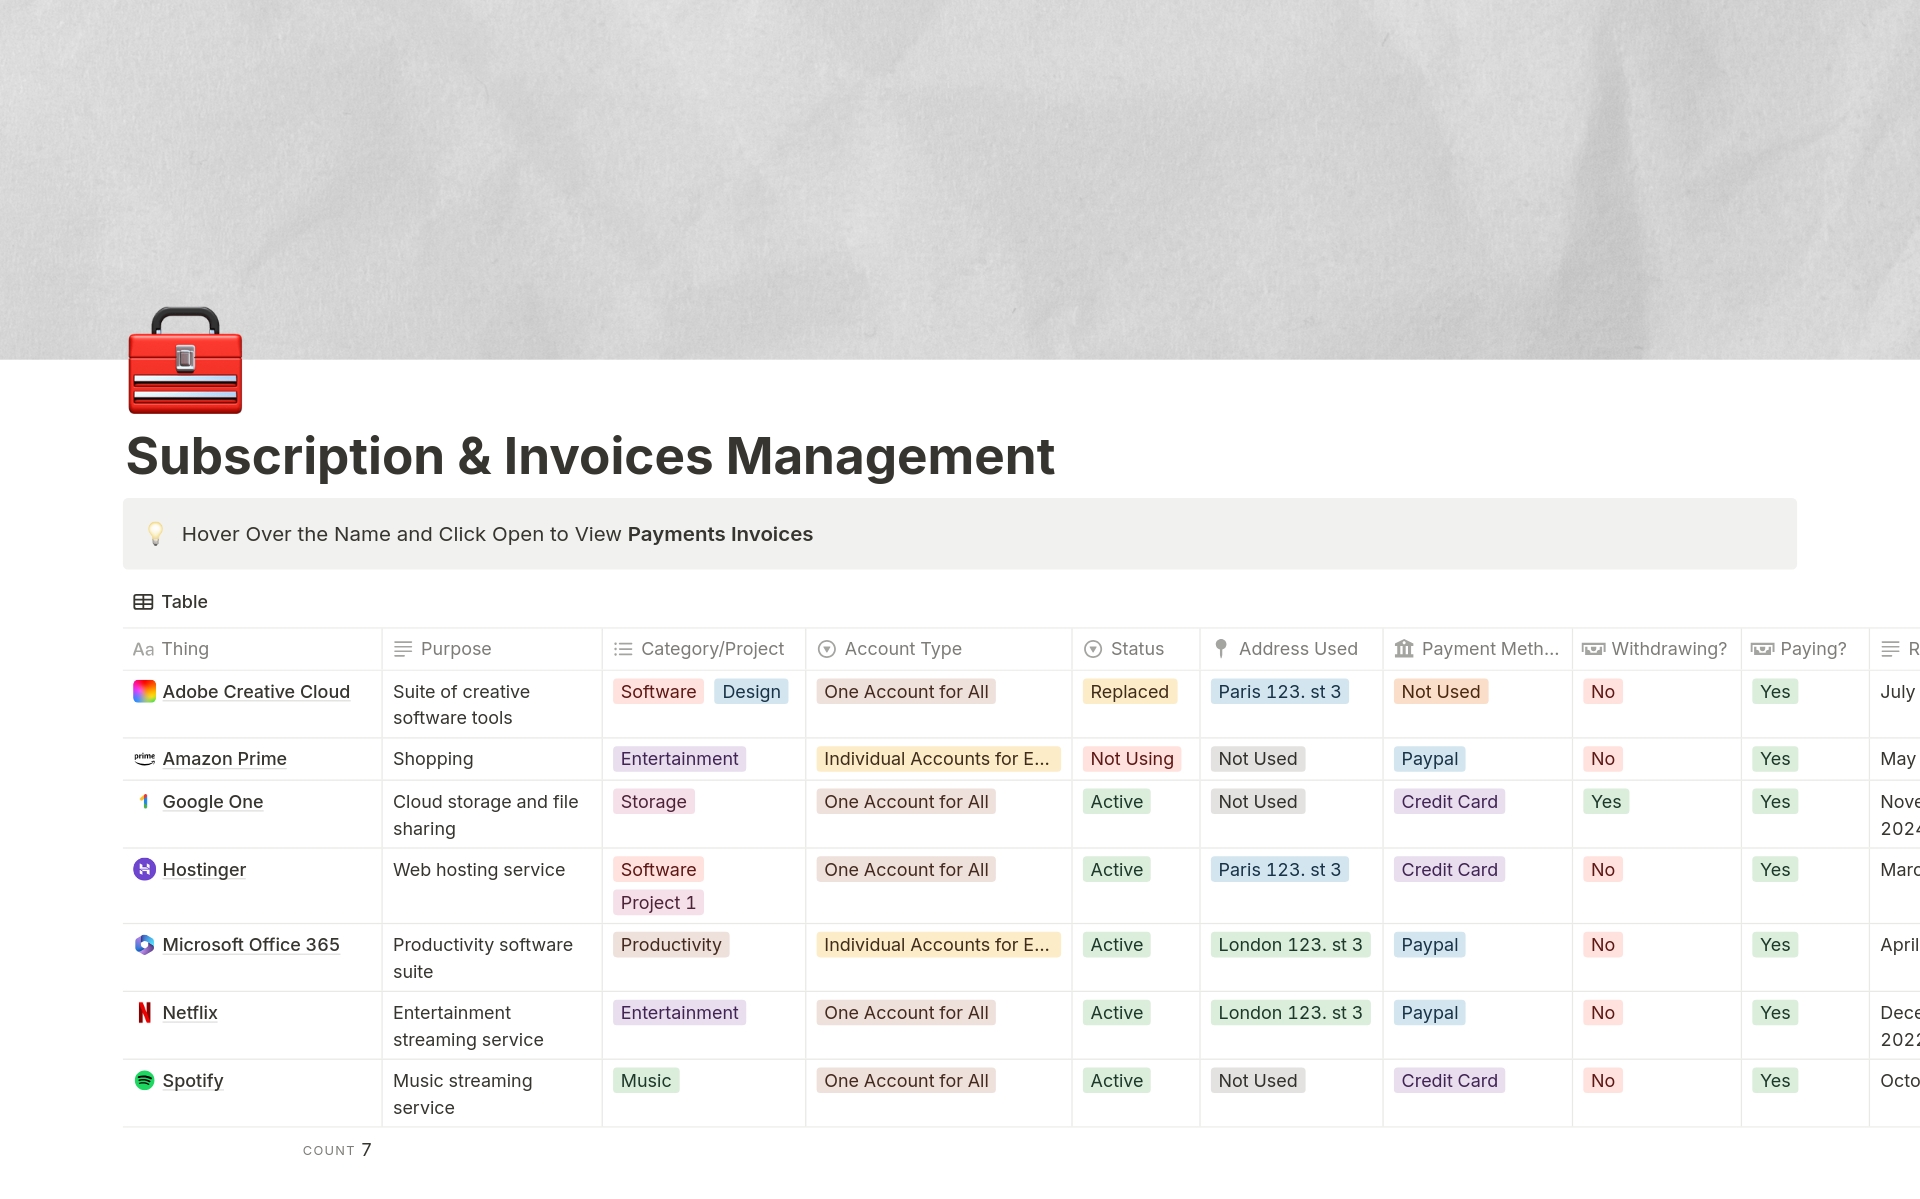 Streamline your subscription and invoice management with ease. Track all your expenses and payments efficiently.